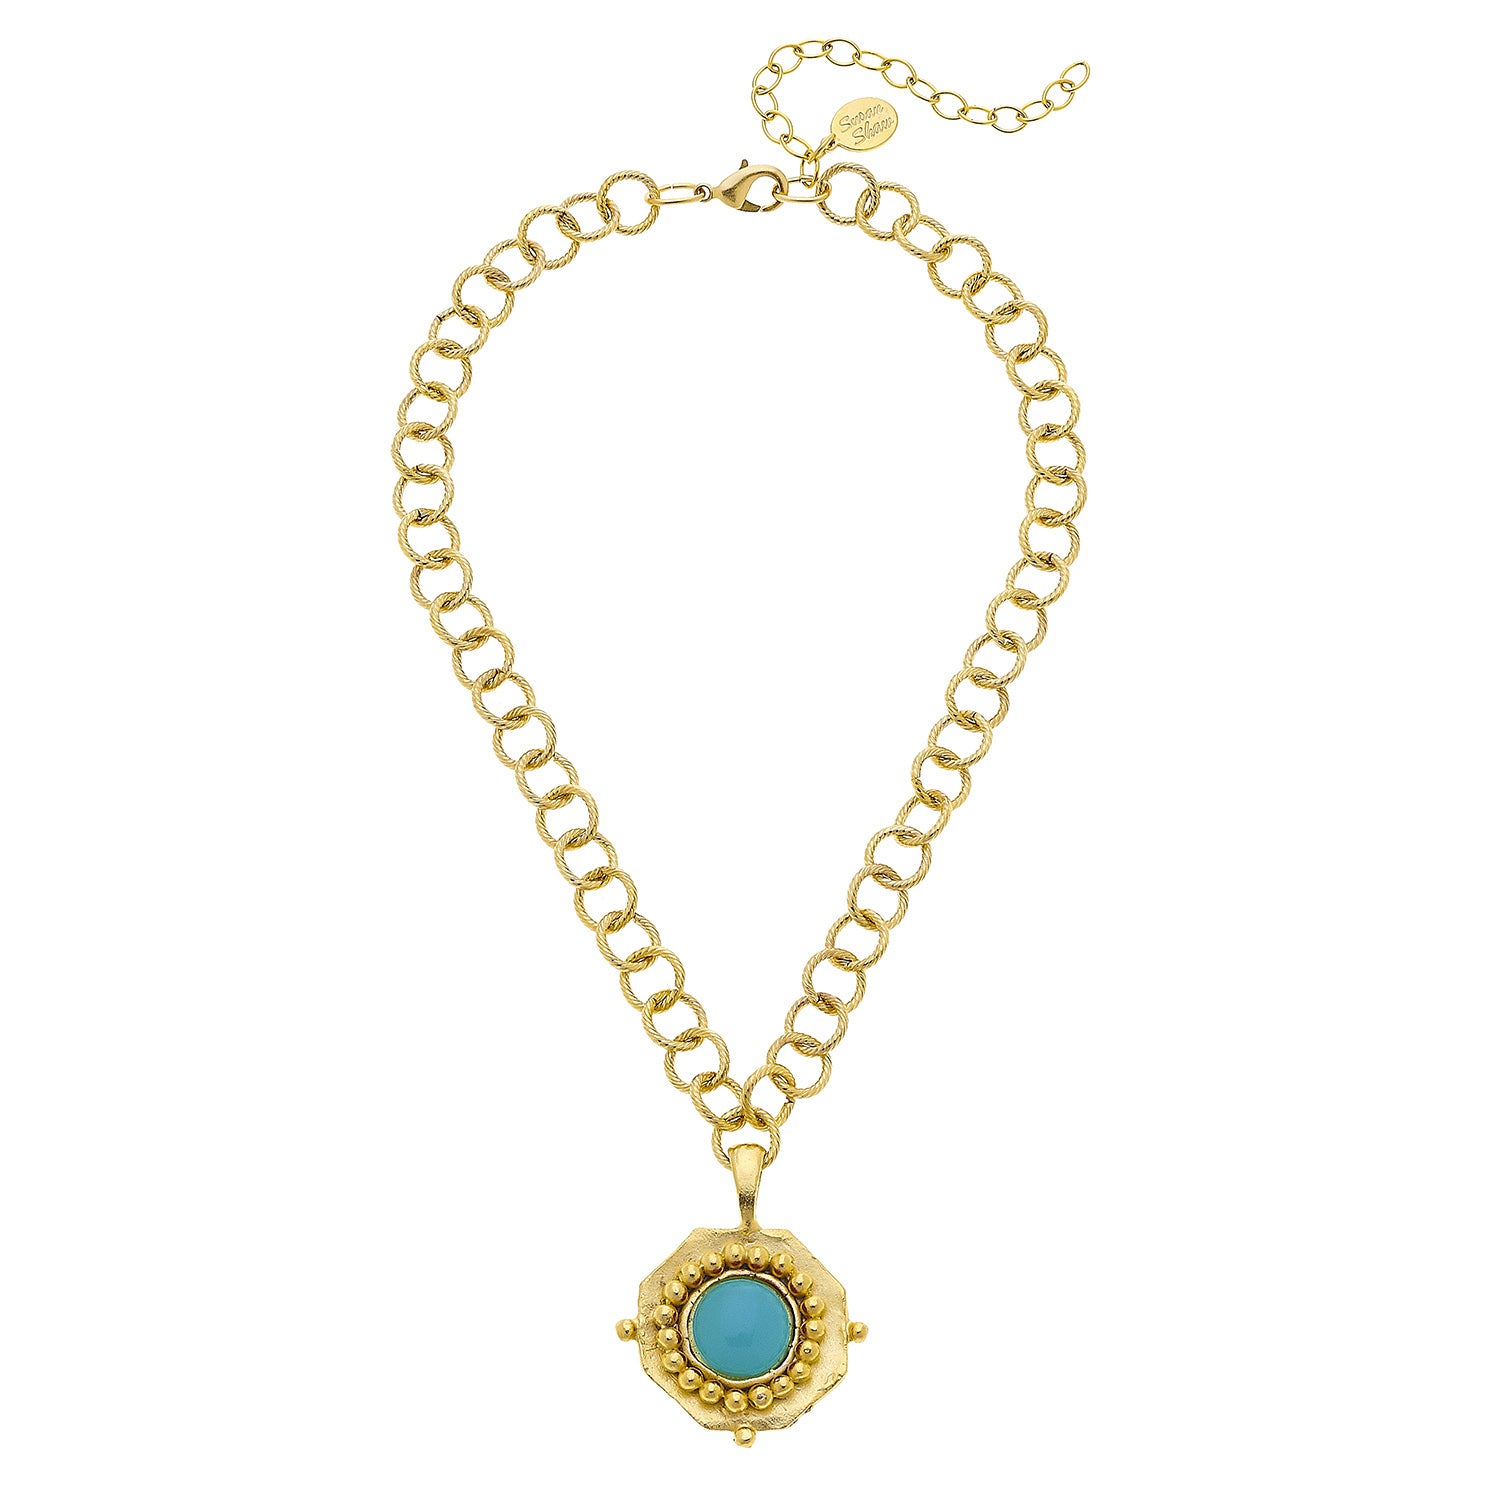 Susan Shaw Gold Plated Round Crystal Pendant Necklace